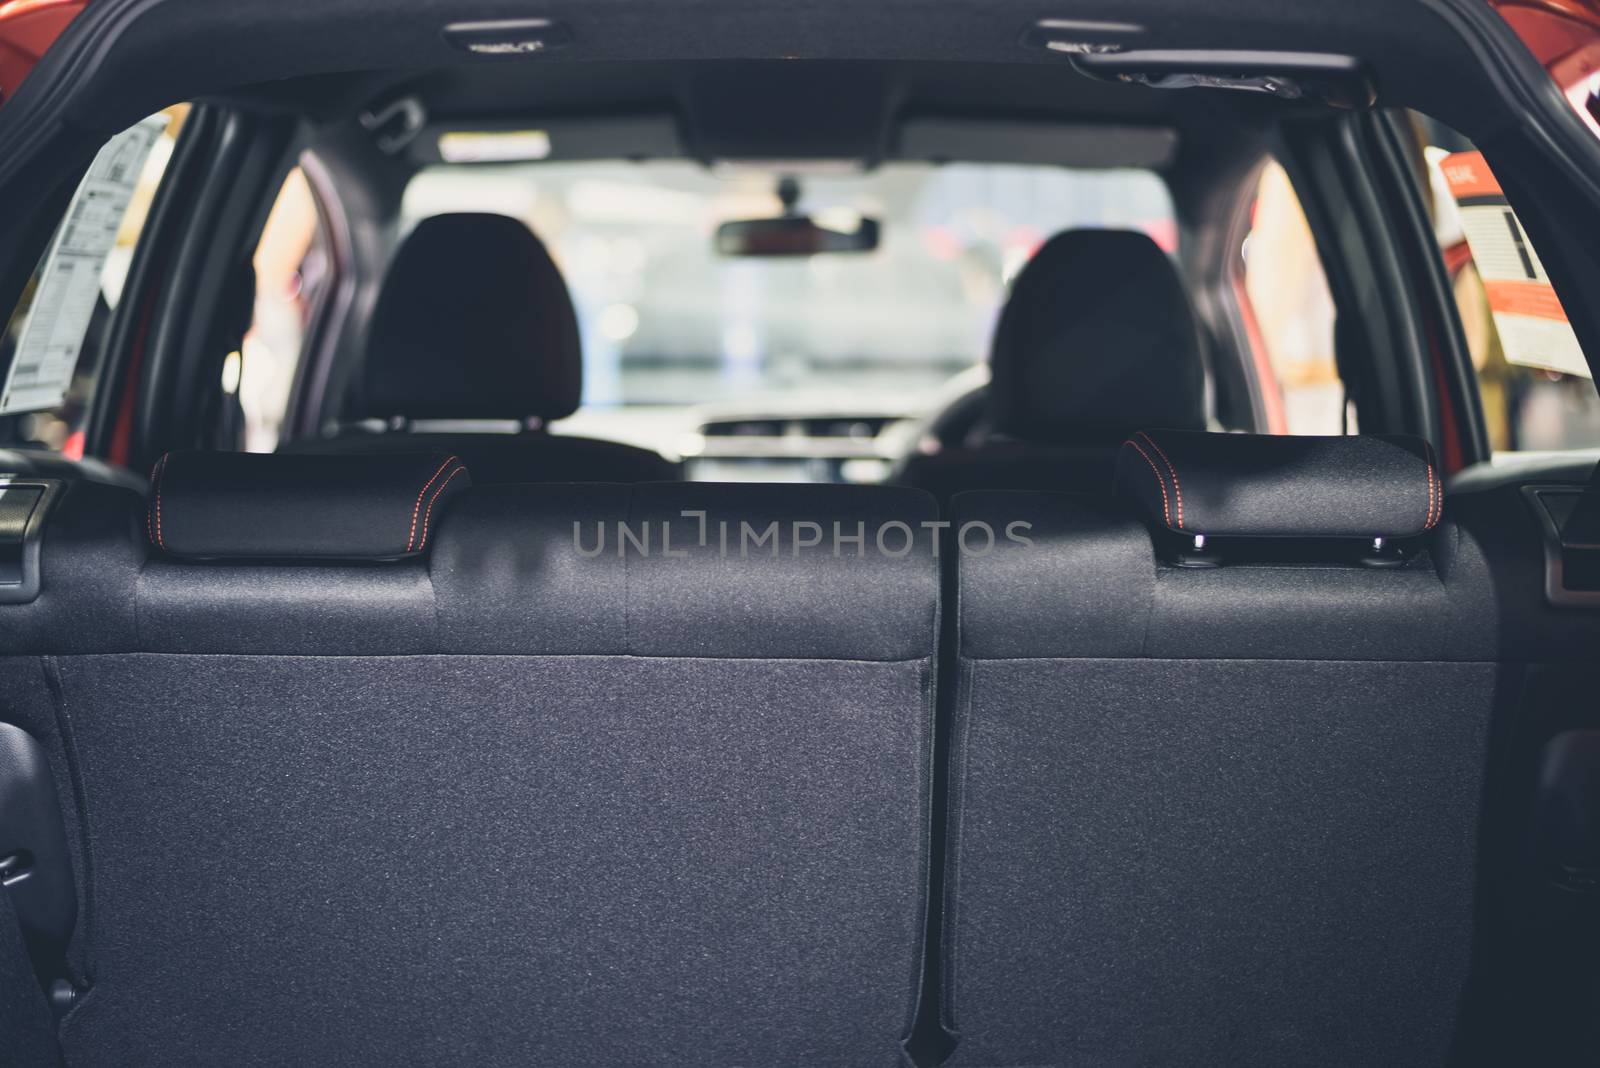 Interior Of The Car for backgroud by ahimaone